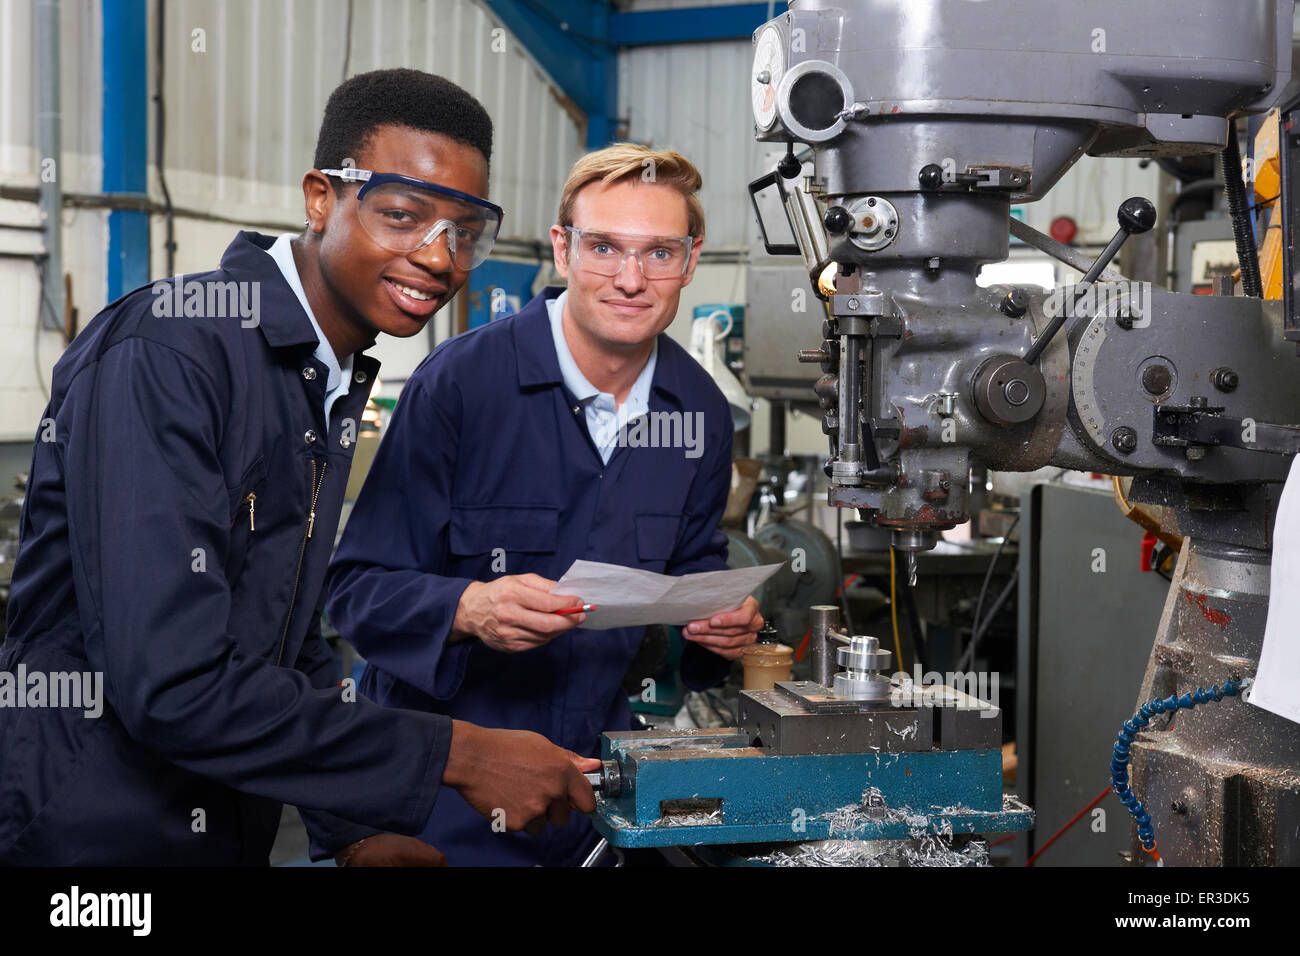 Engineer Showing Apprentice How to Use Drill In Factory Stock Photo